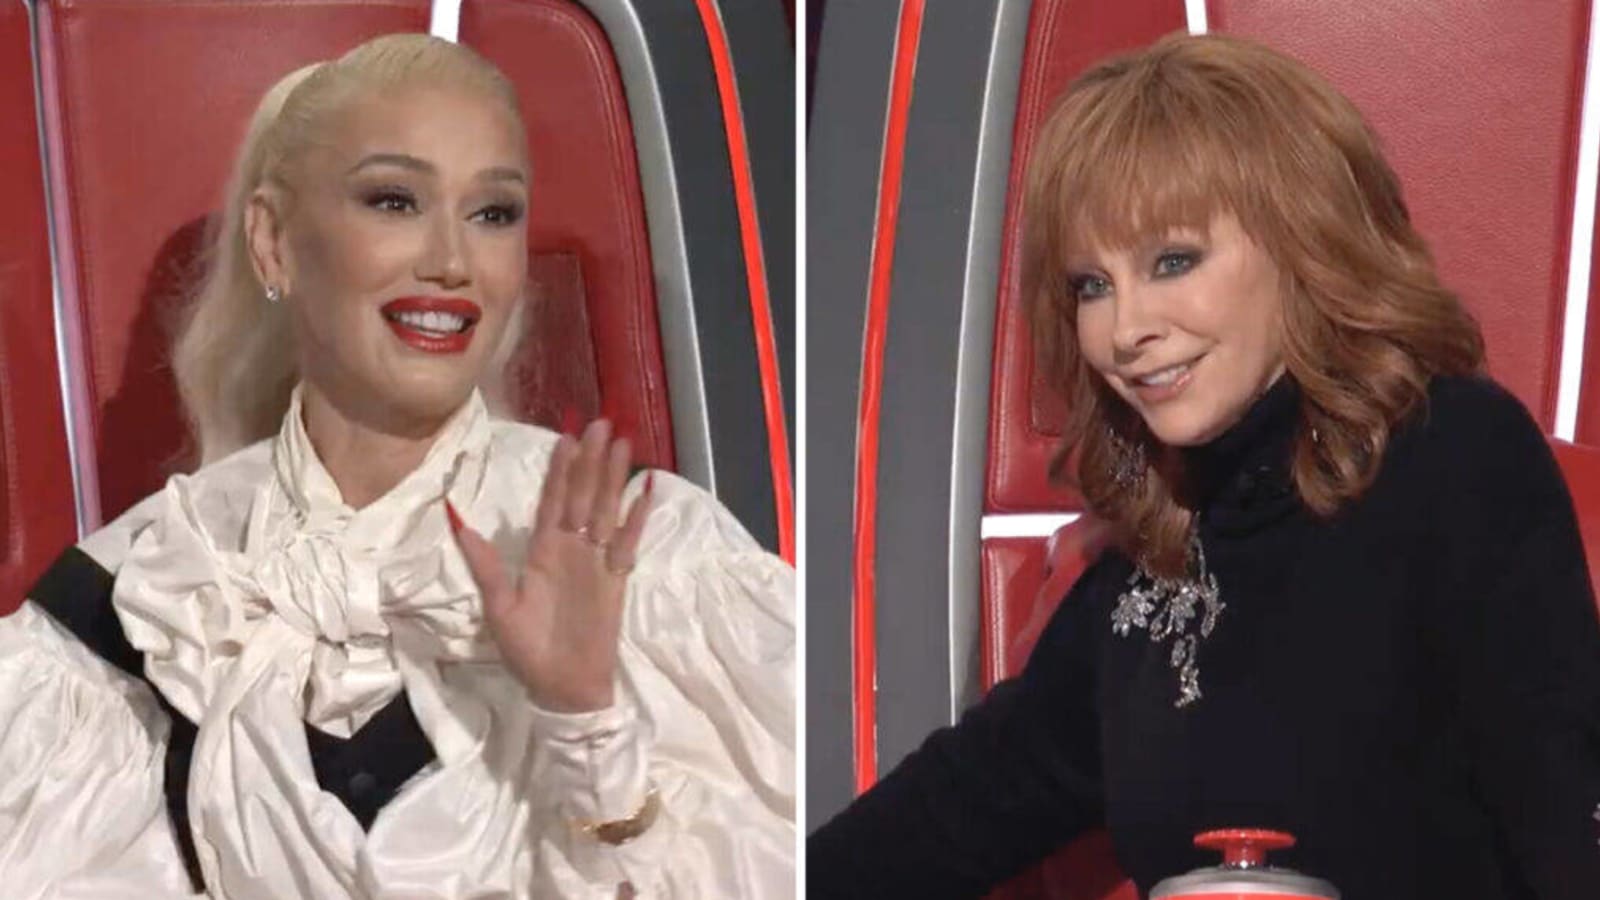 ‘The Voice’: Gwen Stefani Makes Shocking Steal From Team Reba (VIDEO)